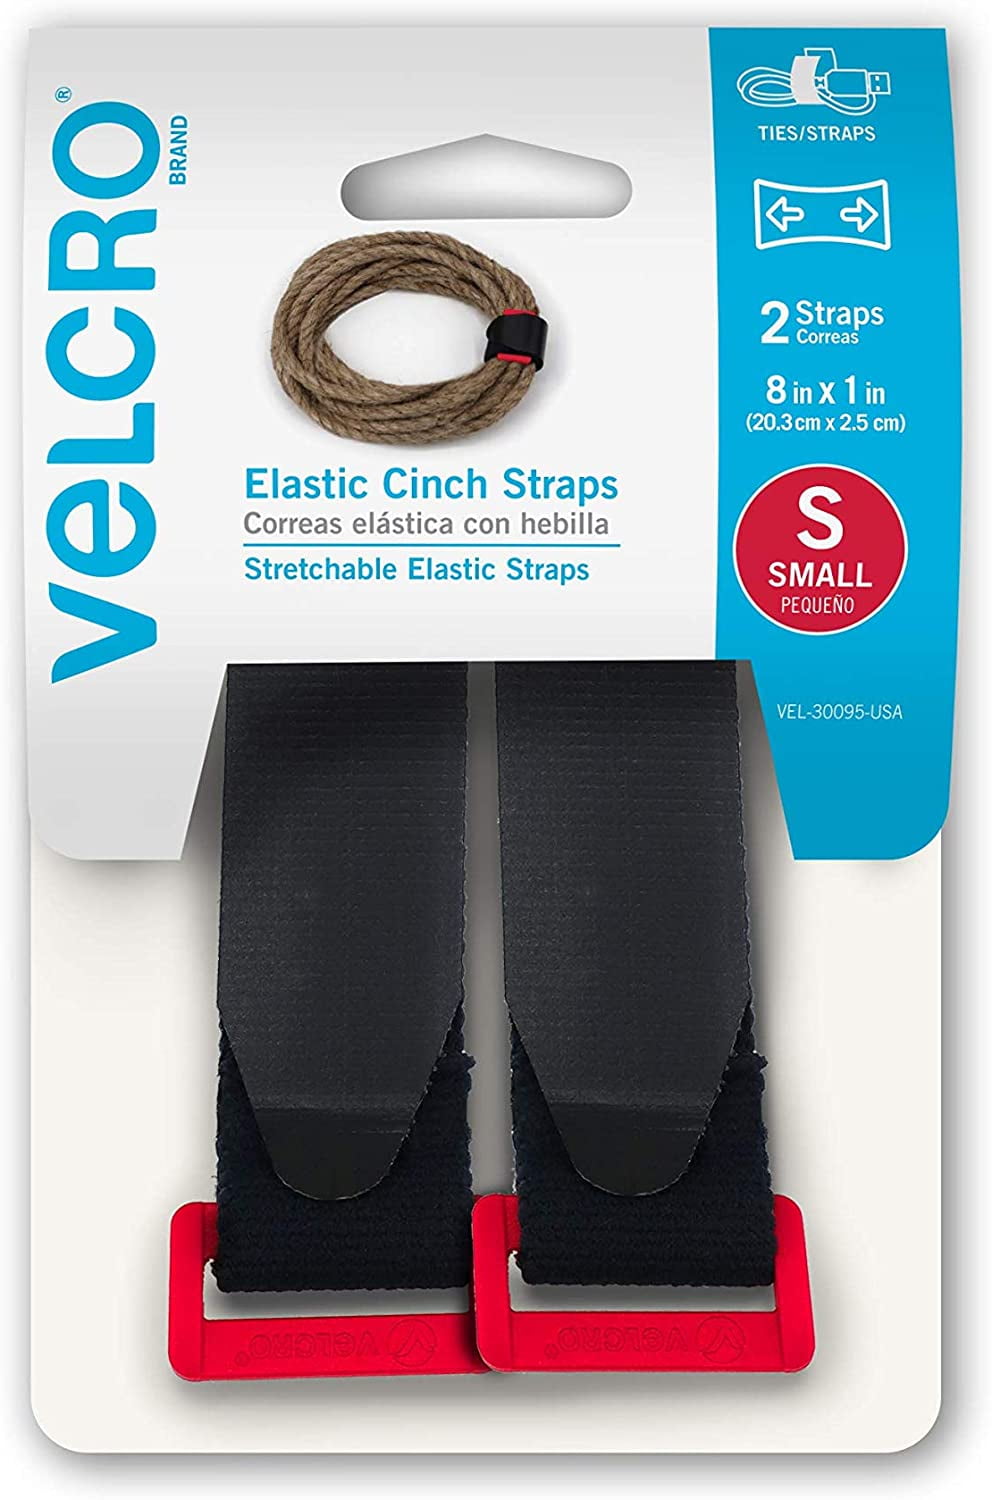 VELCRO Brand Elastic Cinch Straps with Buckle, Adjustable, Stretch, Black,  S - 8in x 1in 